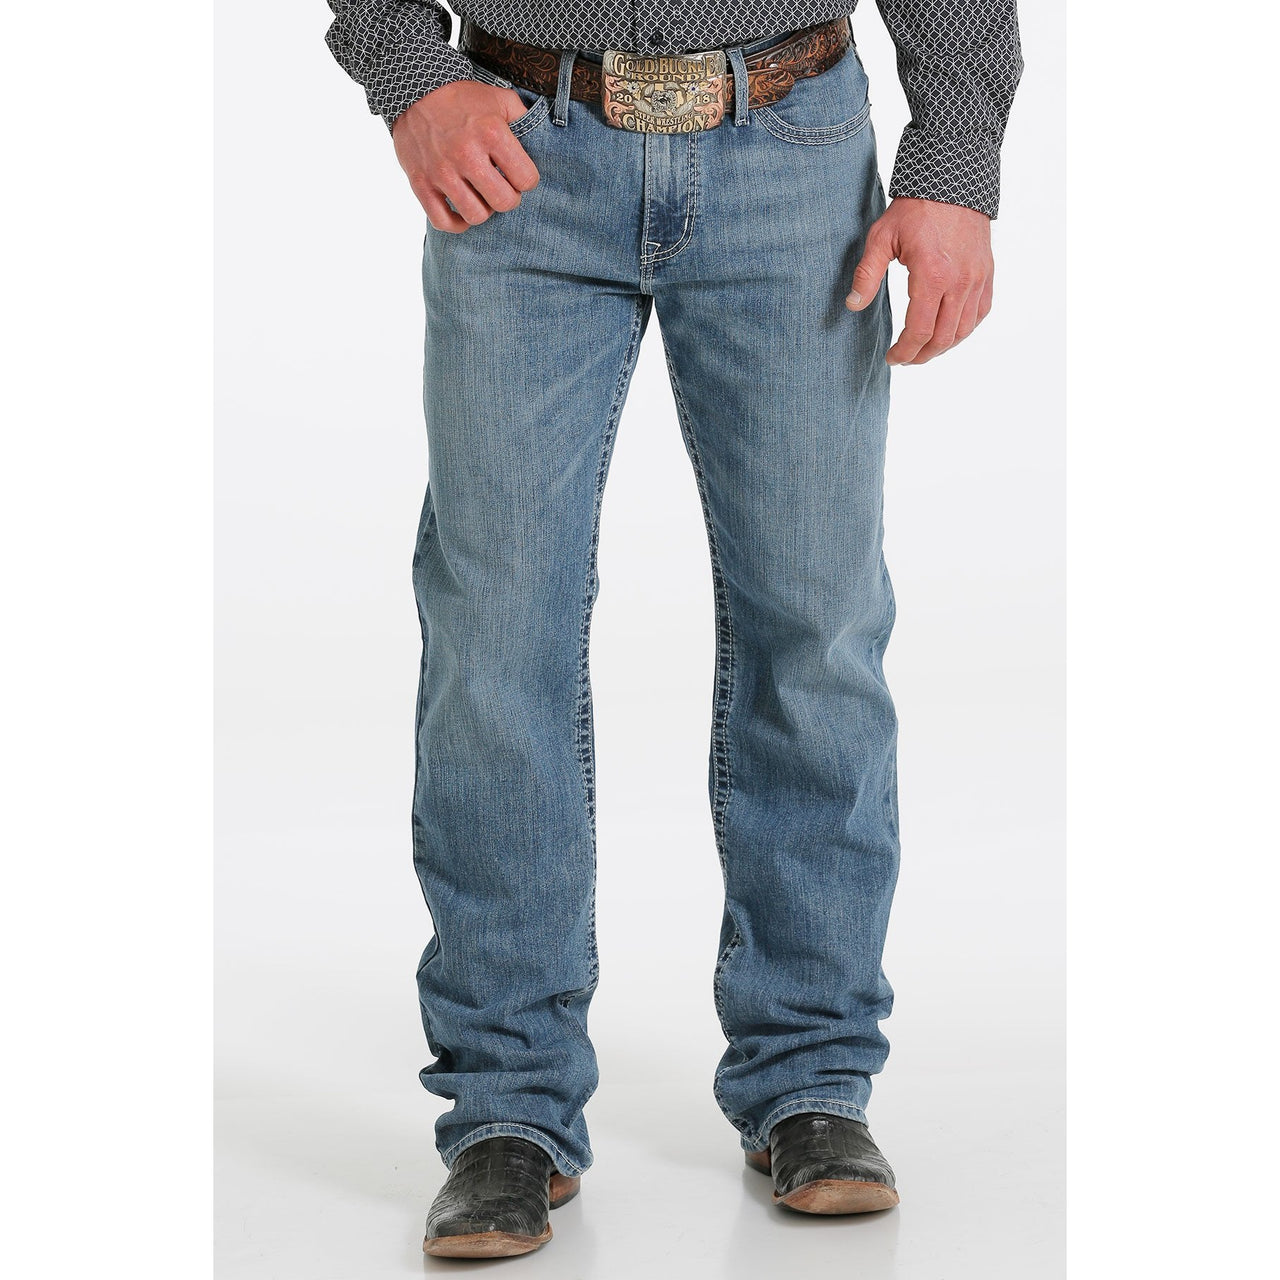 Cinch Men's Relaxed Fit Grant Jeans - Medium Stonewash